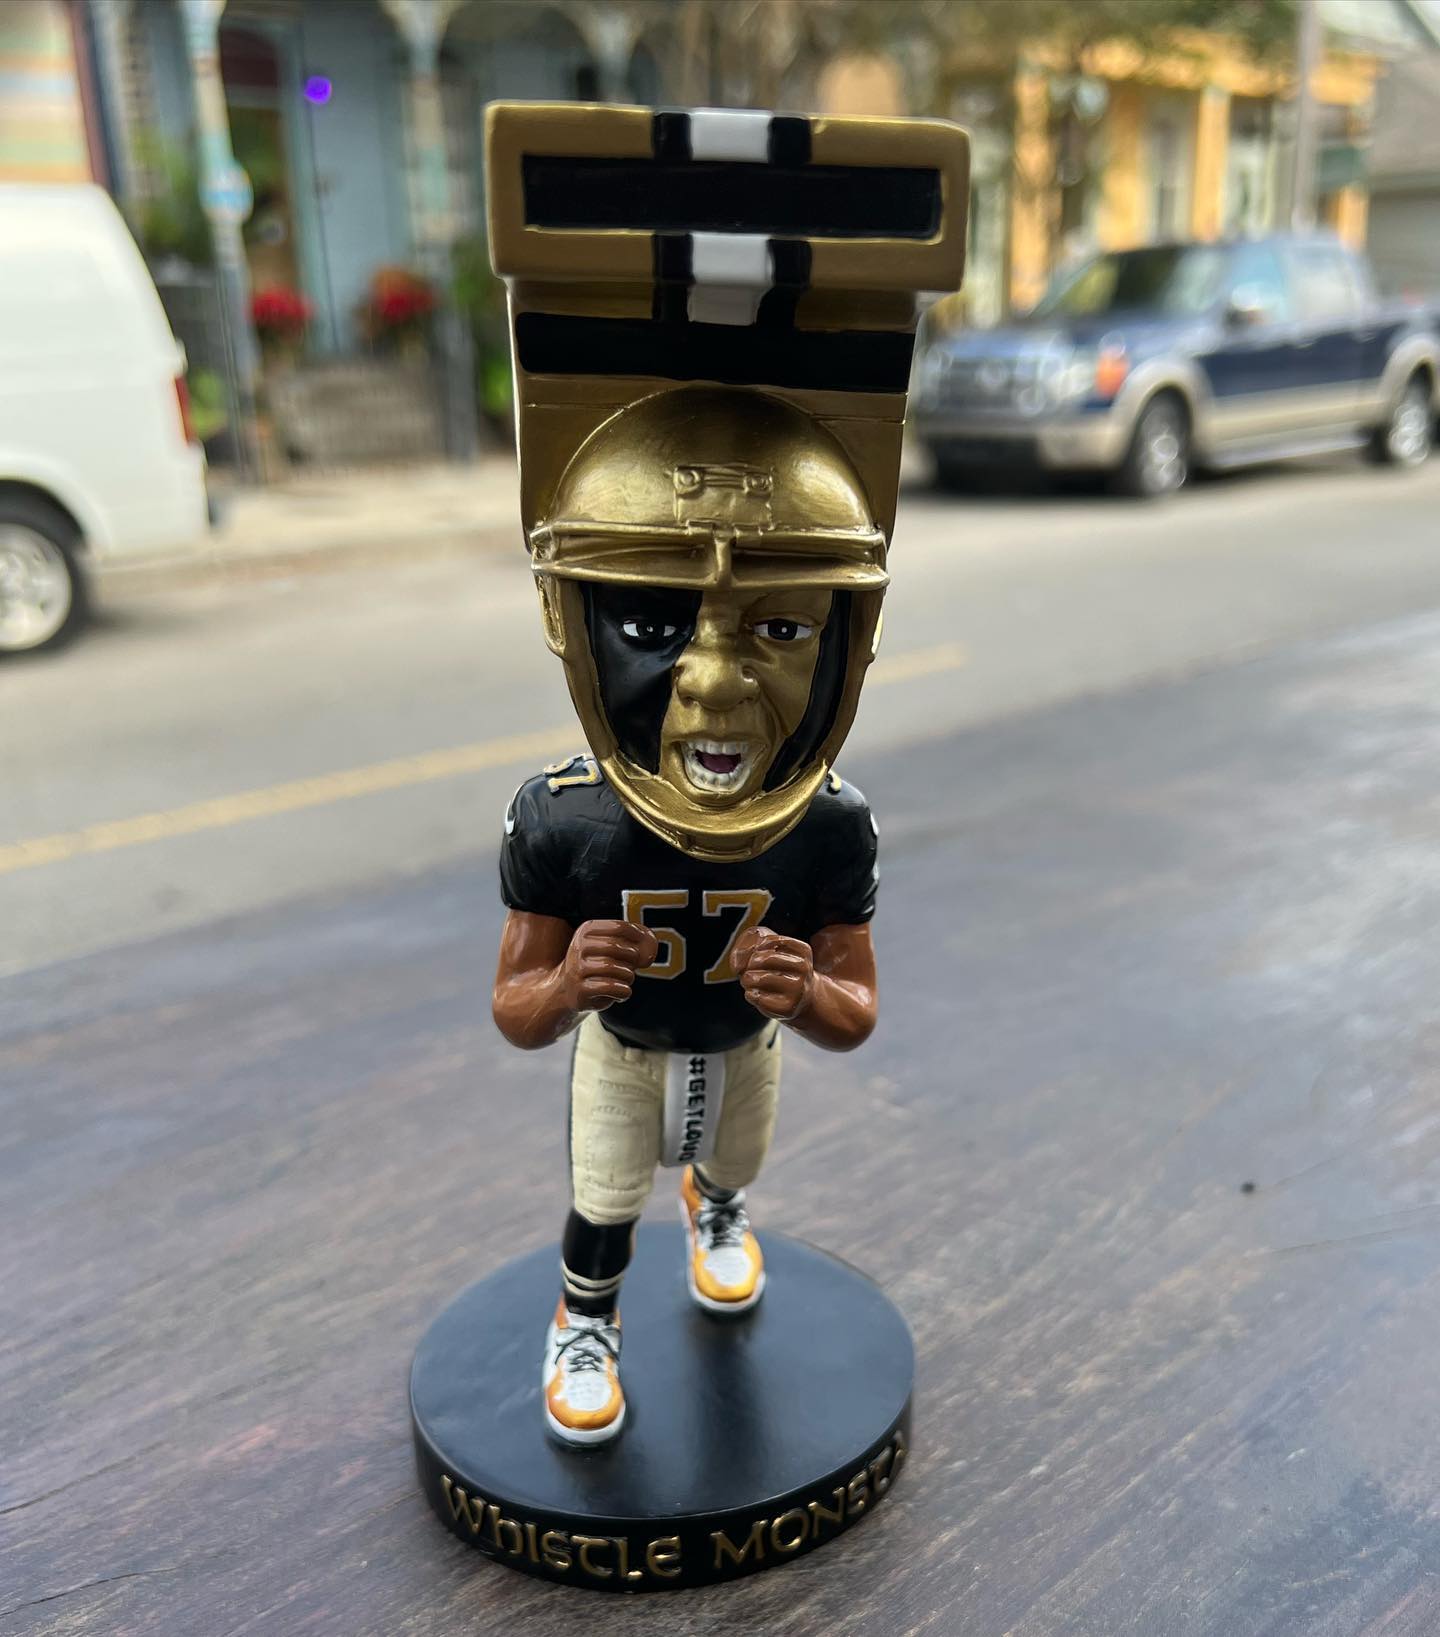 The Official Whistle Monsta Bobble Head - PRE-SALE SPECIAL